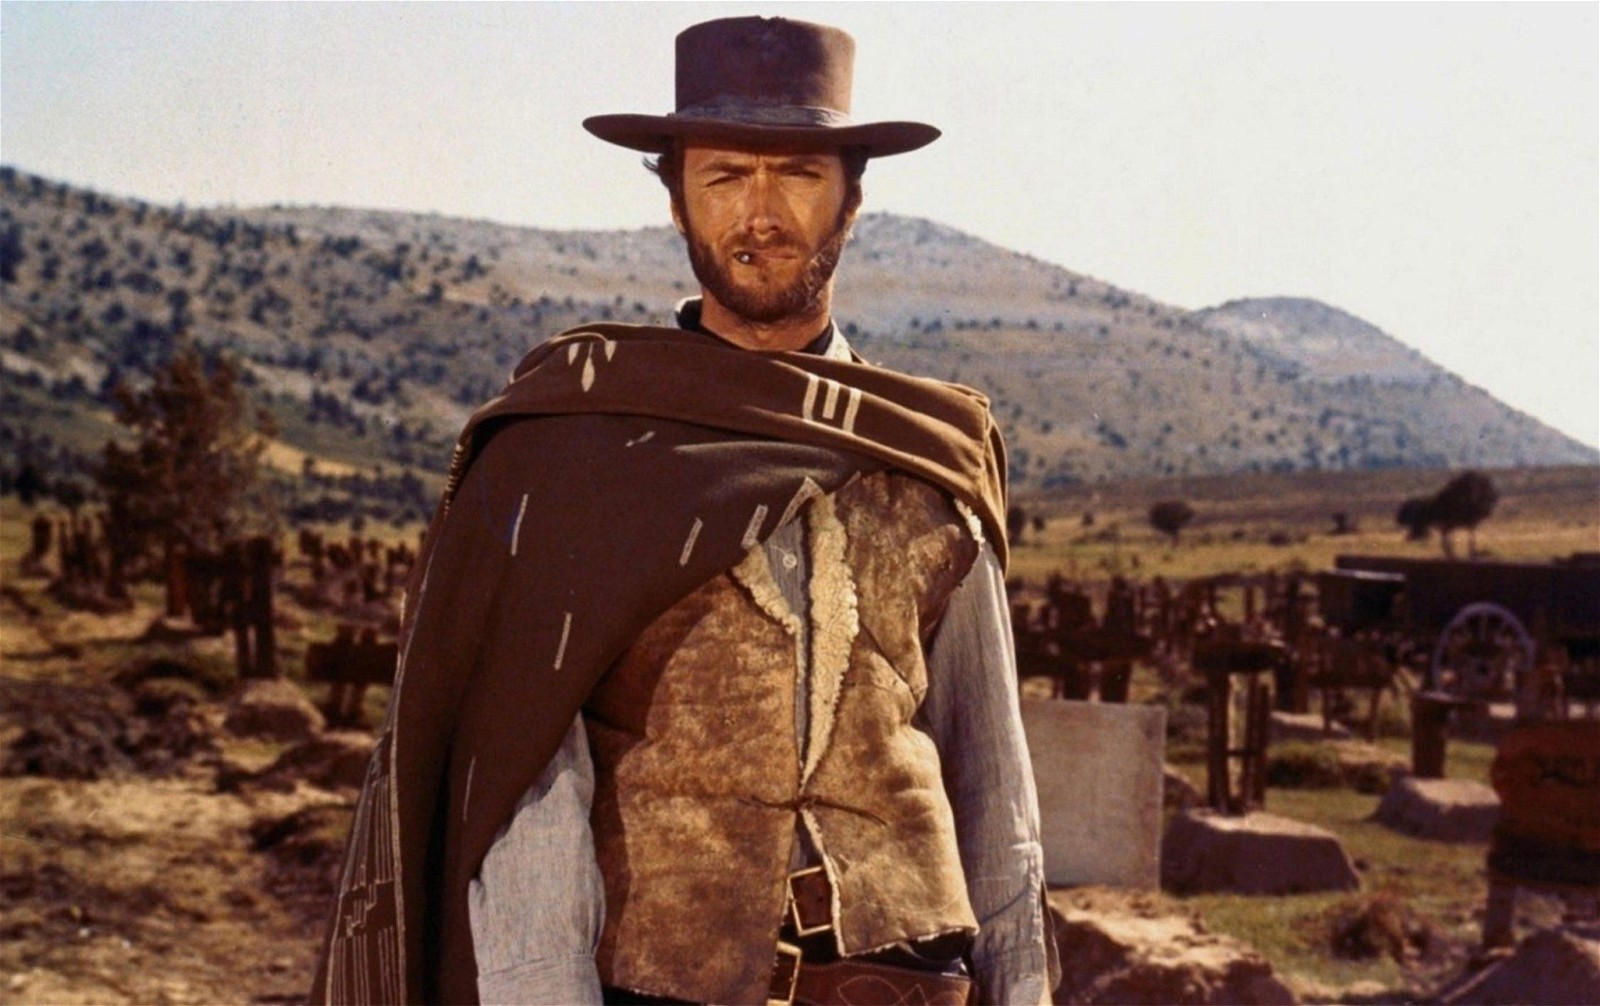 Clint Eastwood in The Good, the Bad, and the Ugly (1966)